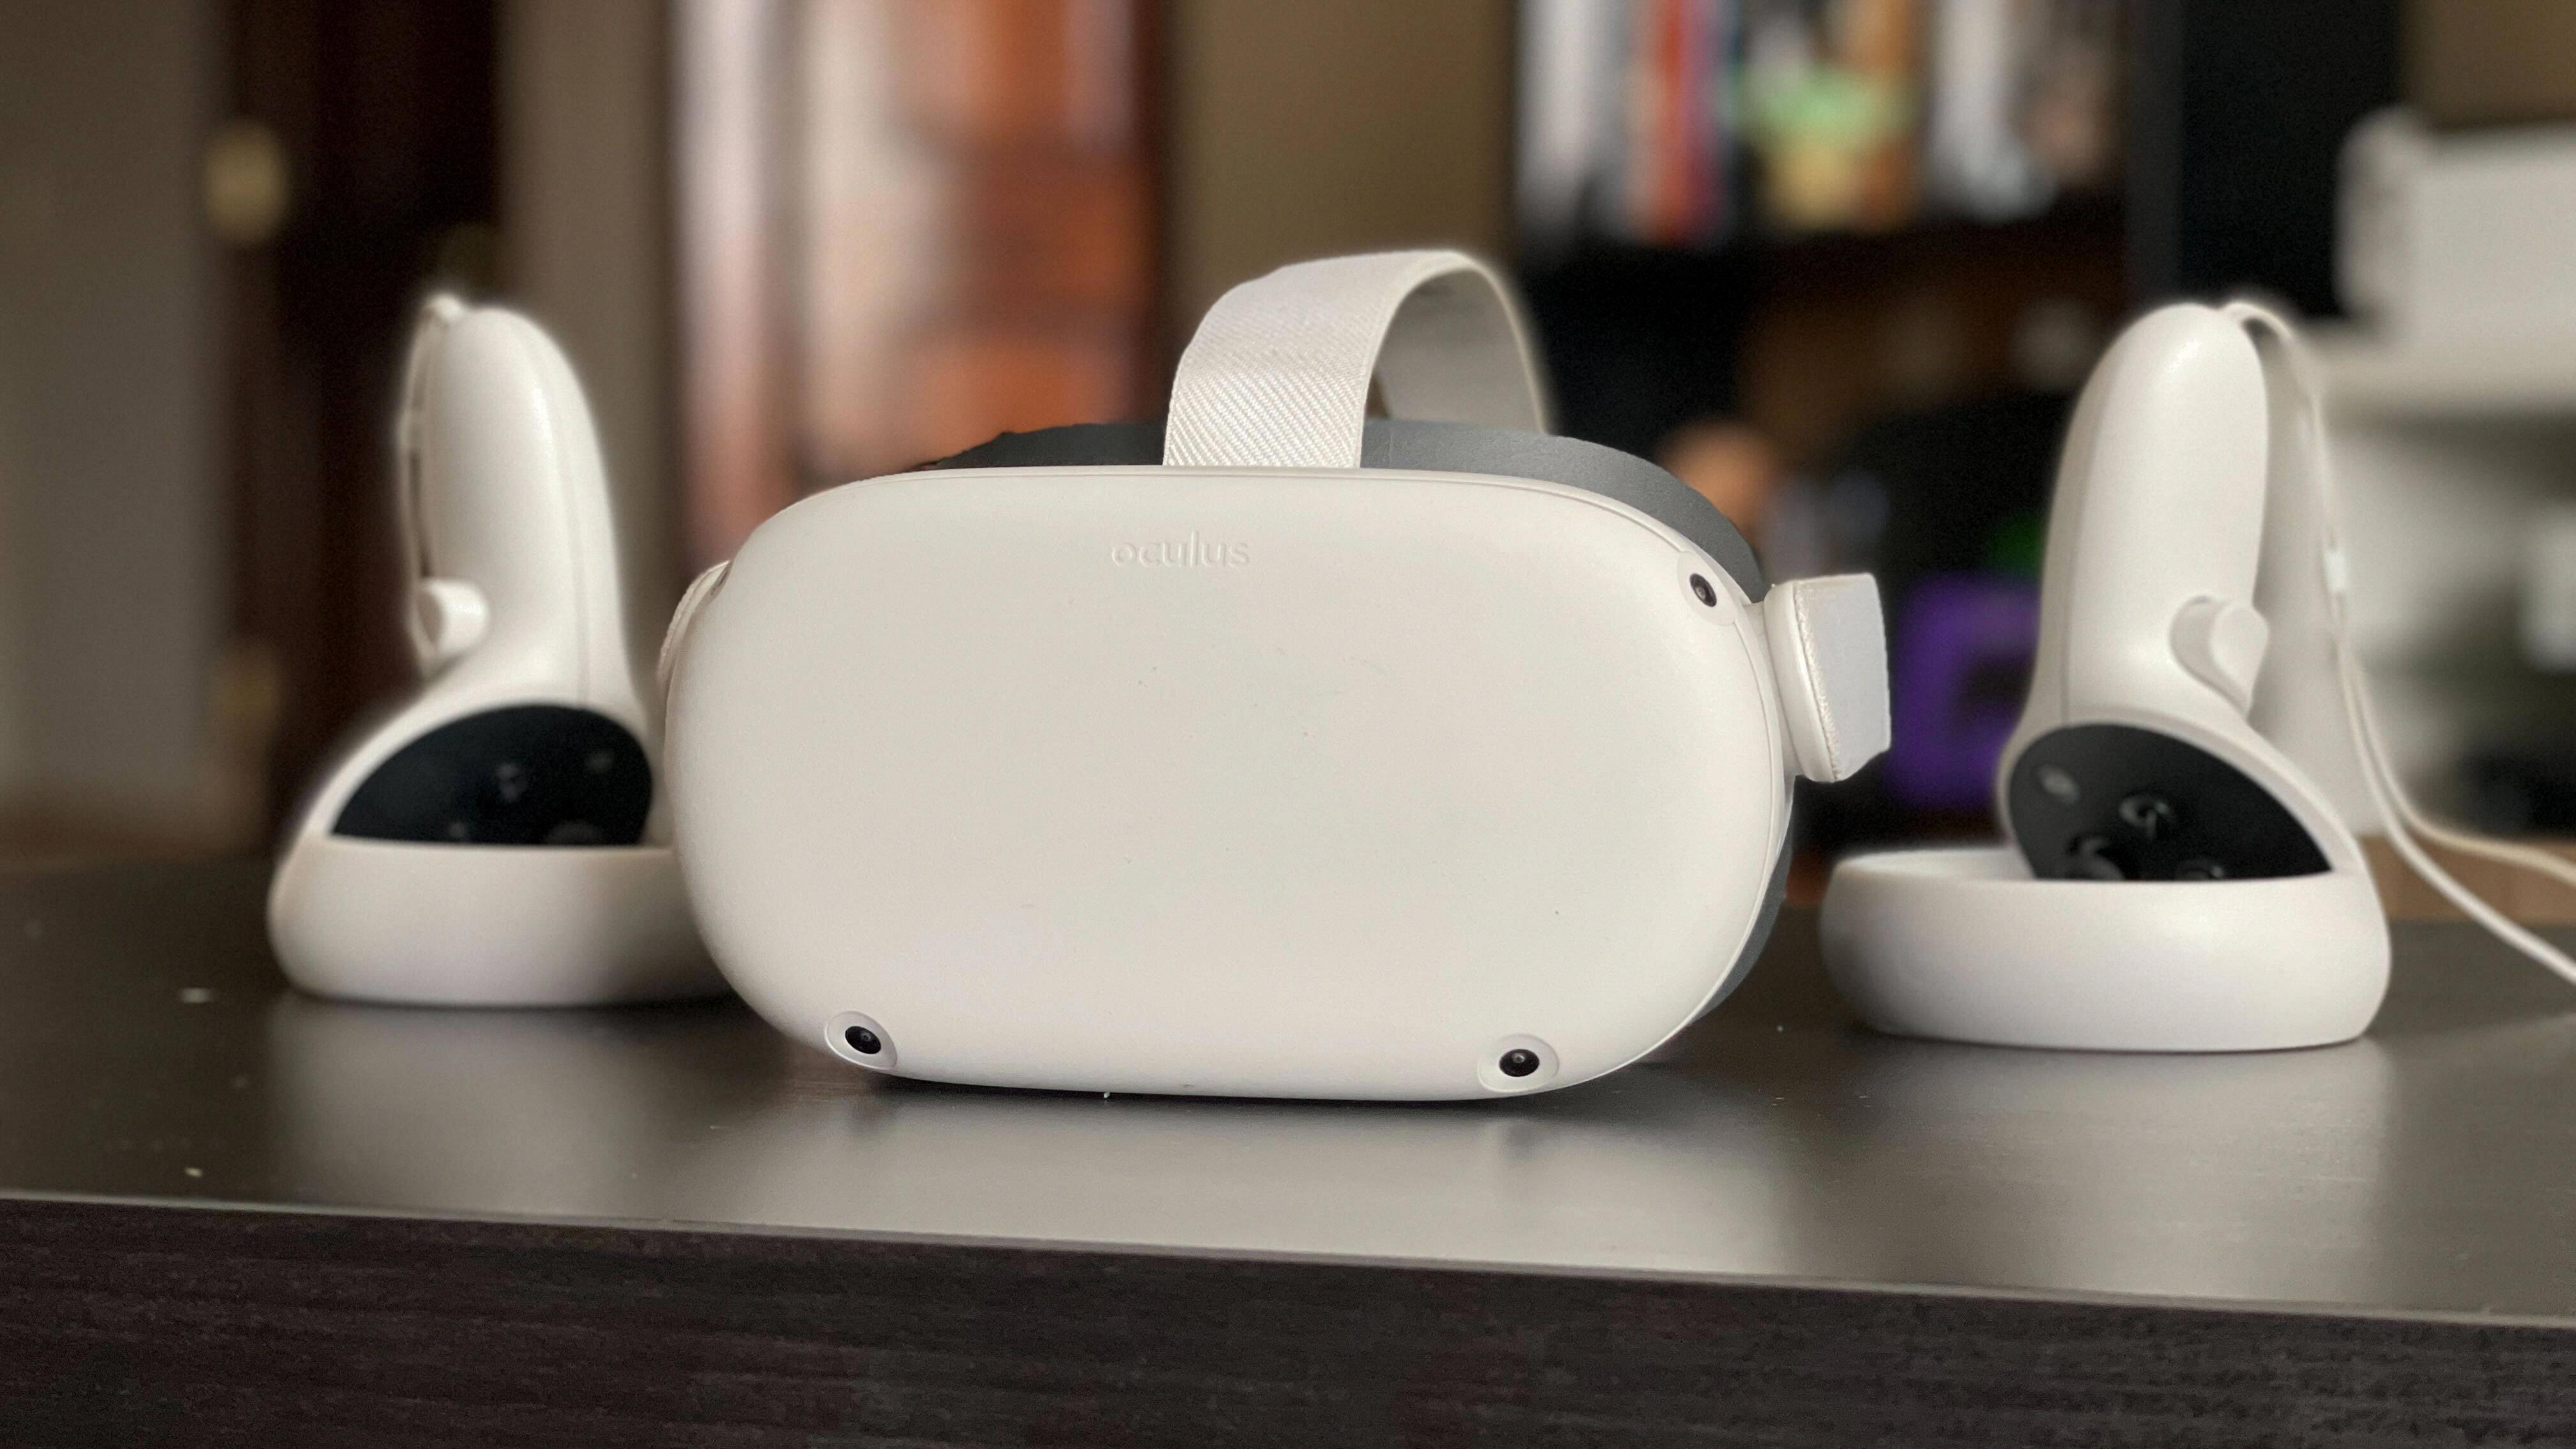 How to Troubleshoot Oculus Quest 2 Stuck on Logo Screen Issues? 17